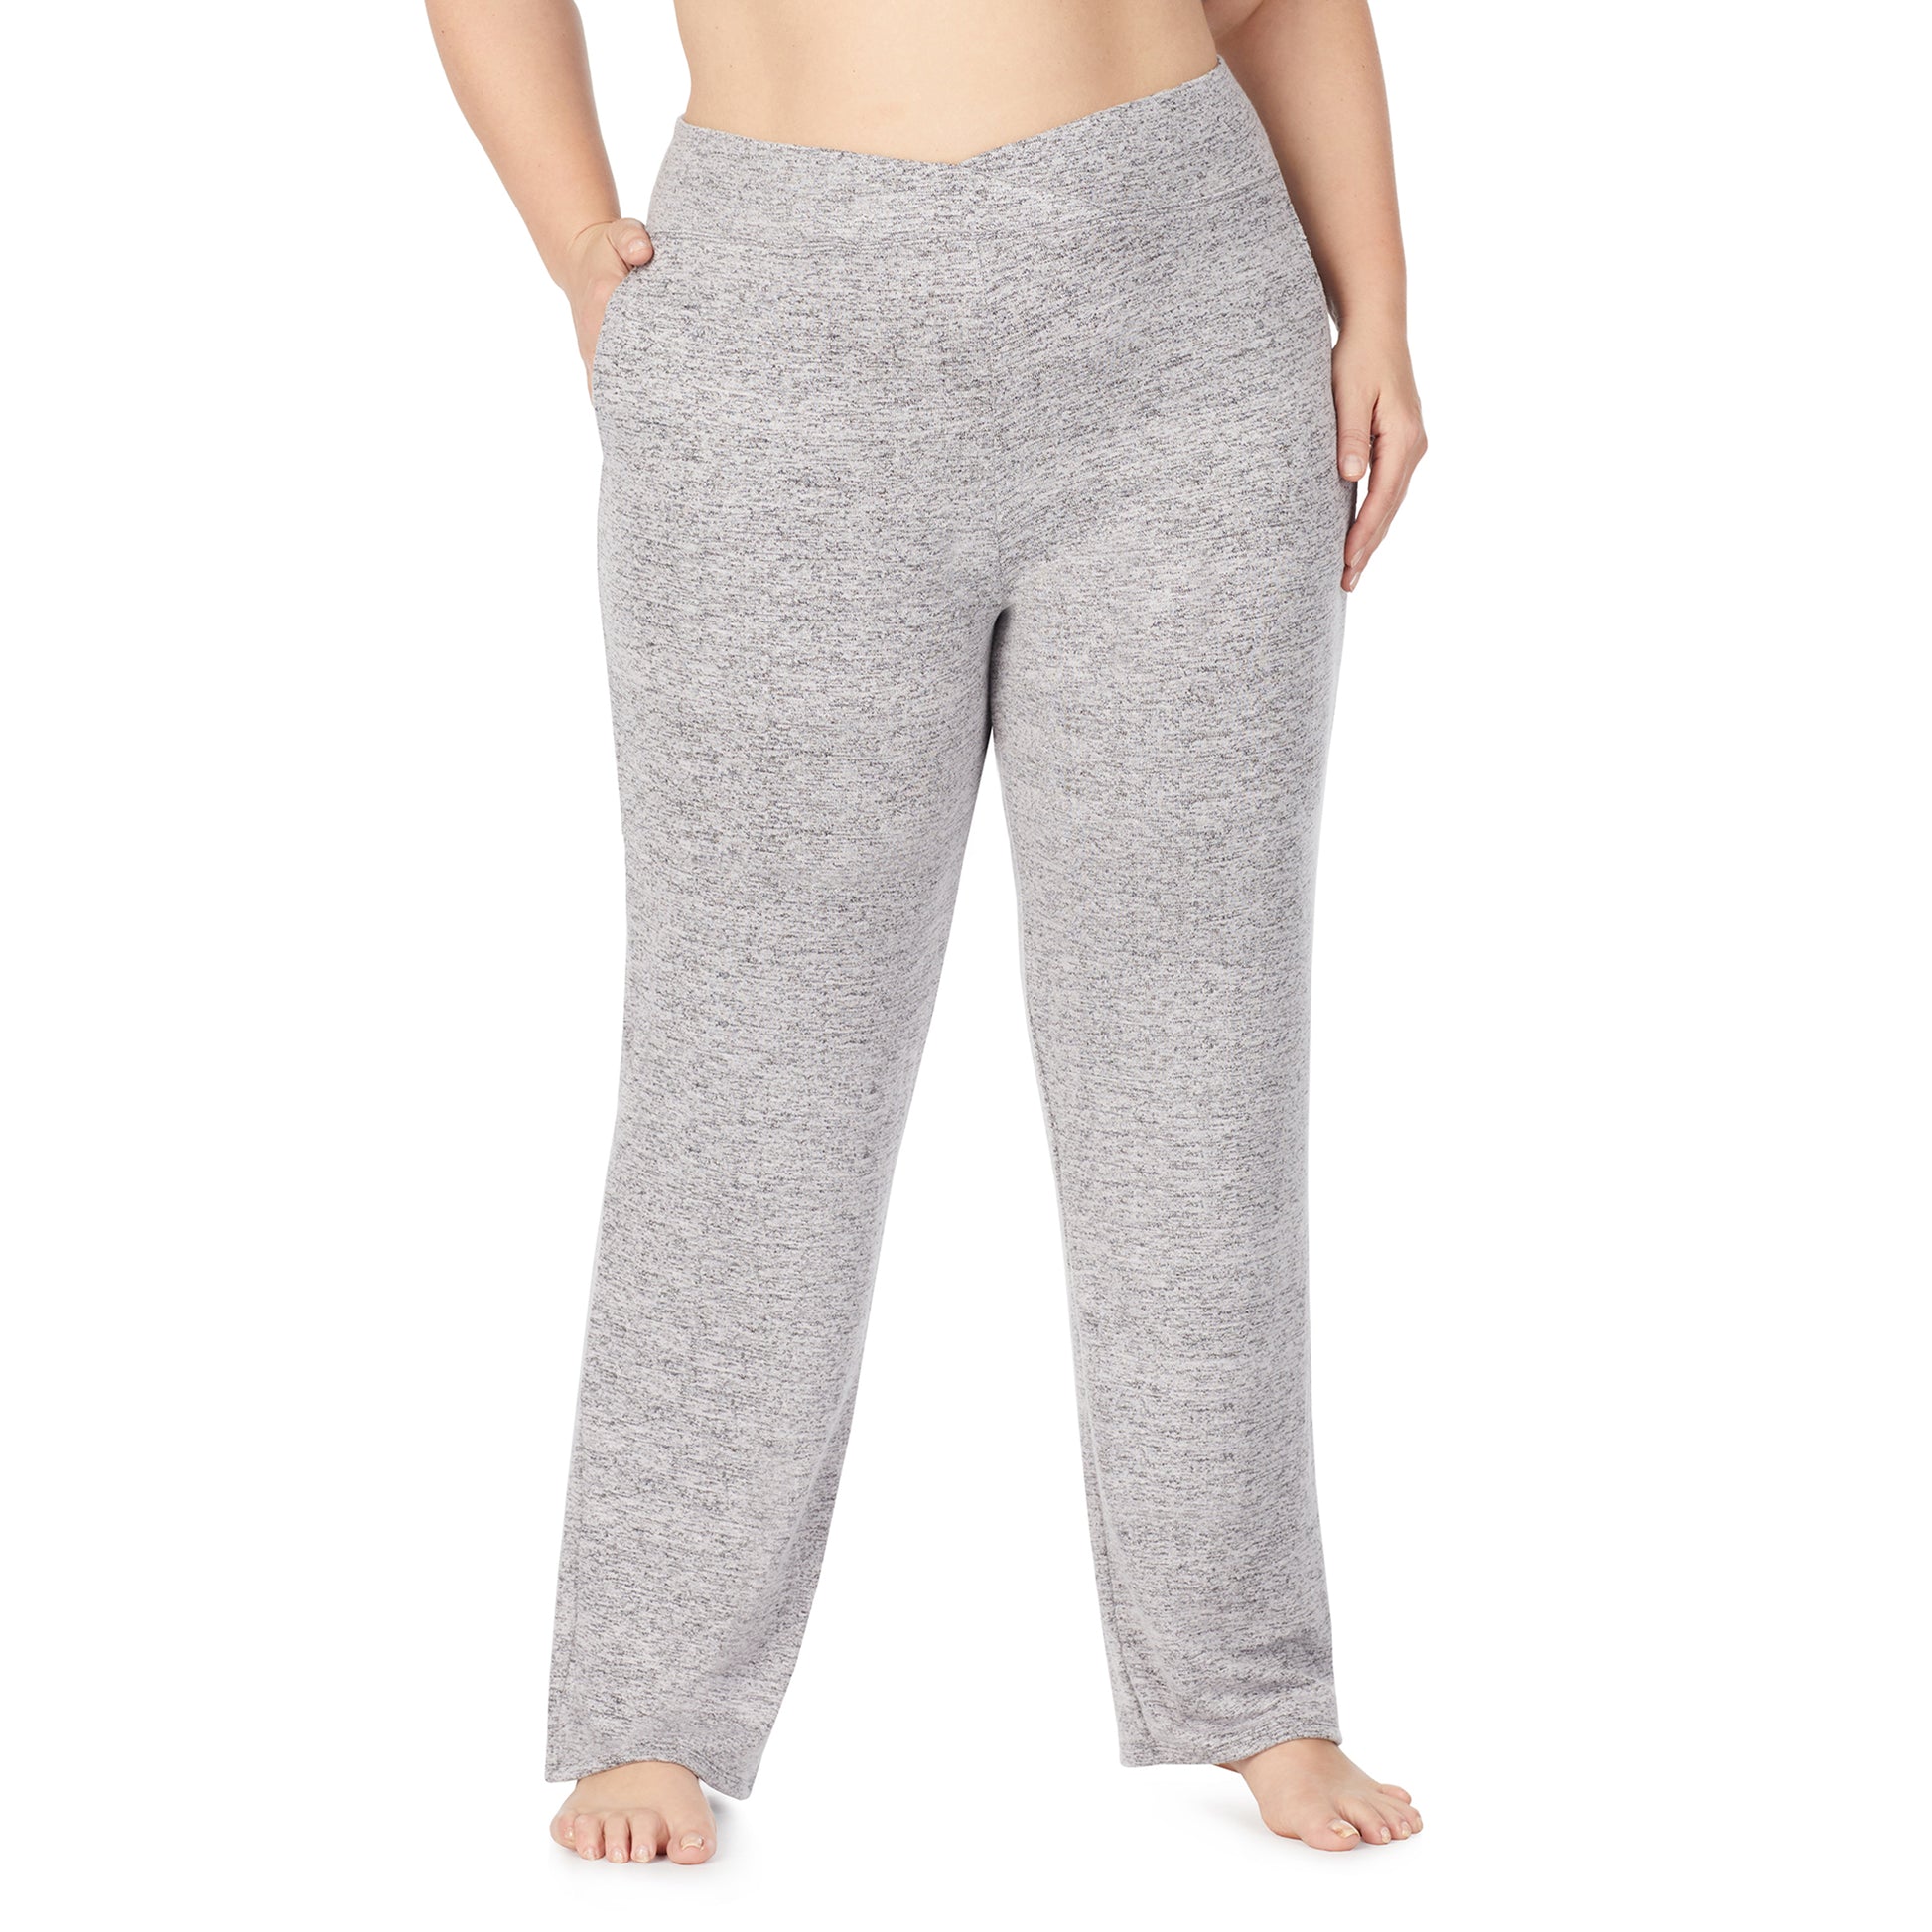 Marled Grey; Model is wearing size 1X. She is 5'9", Bust 38", Waist 36", Hips 48.5". @A lady wearing a marled grey lounge pant plus.